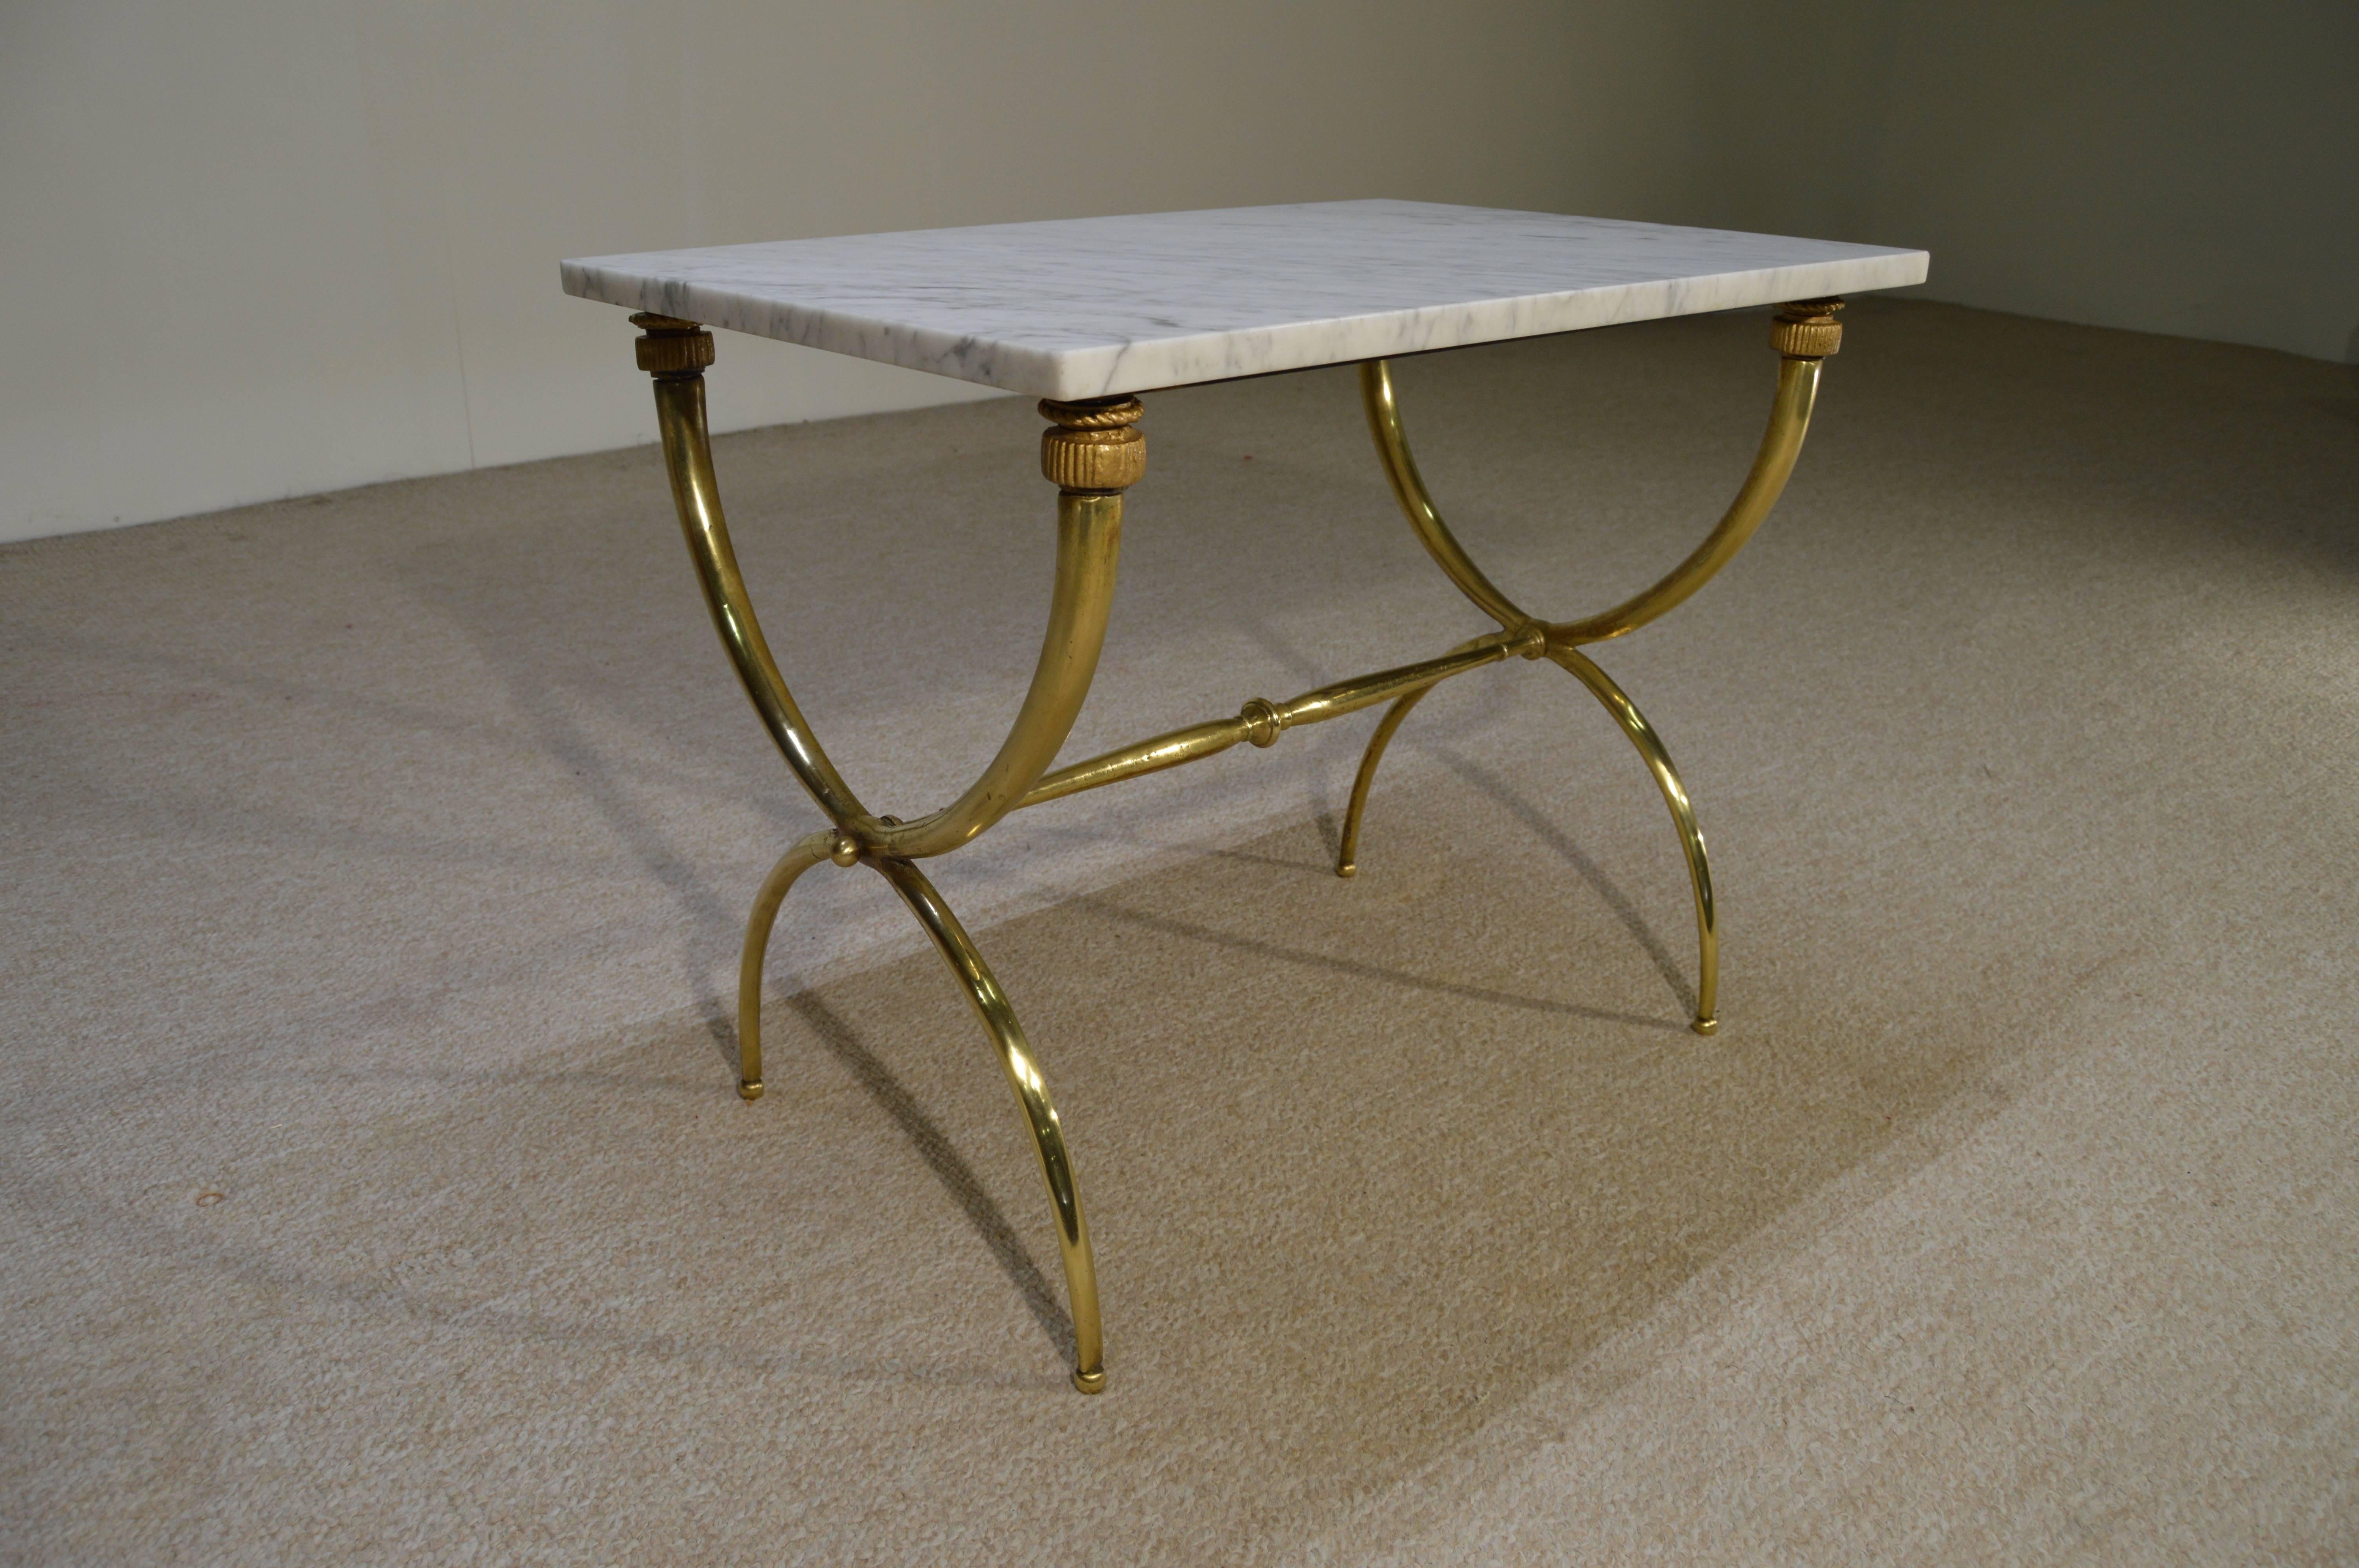 A stunning Gio Ponti style Italian console table having a marble-top and polished brass base, circa 1950.